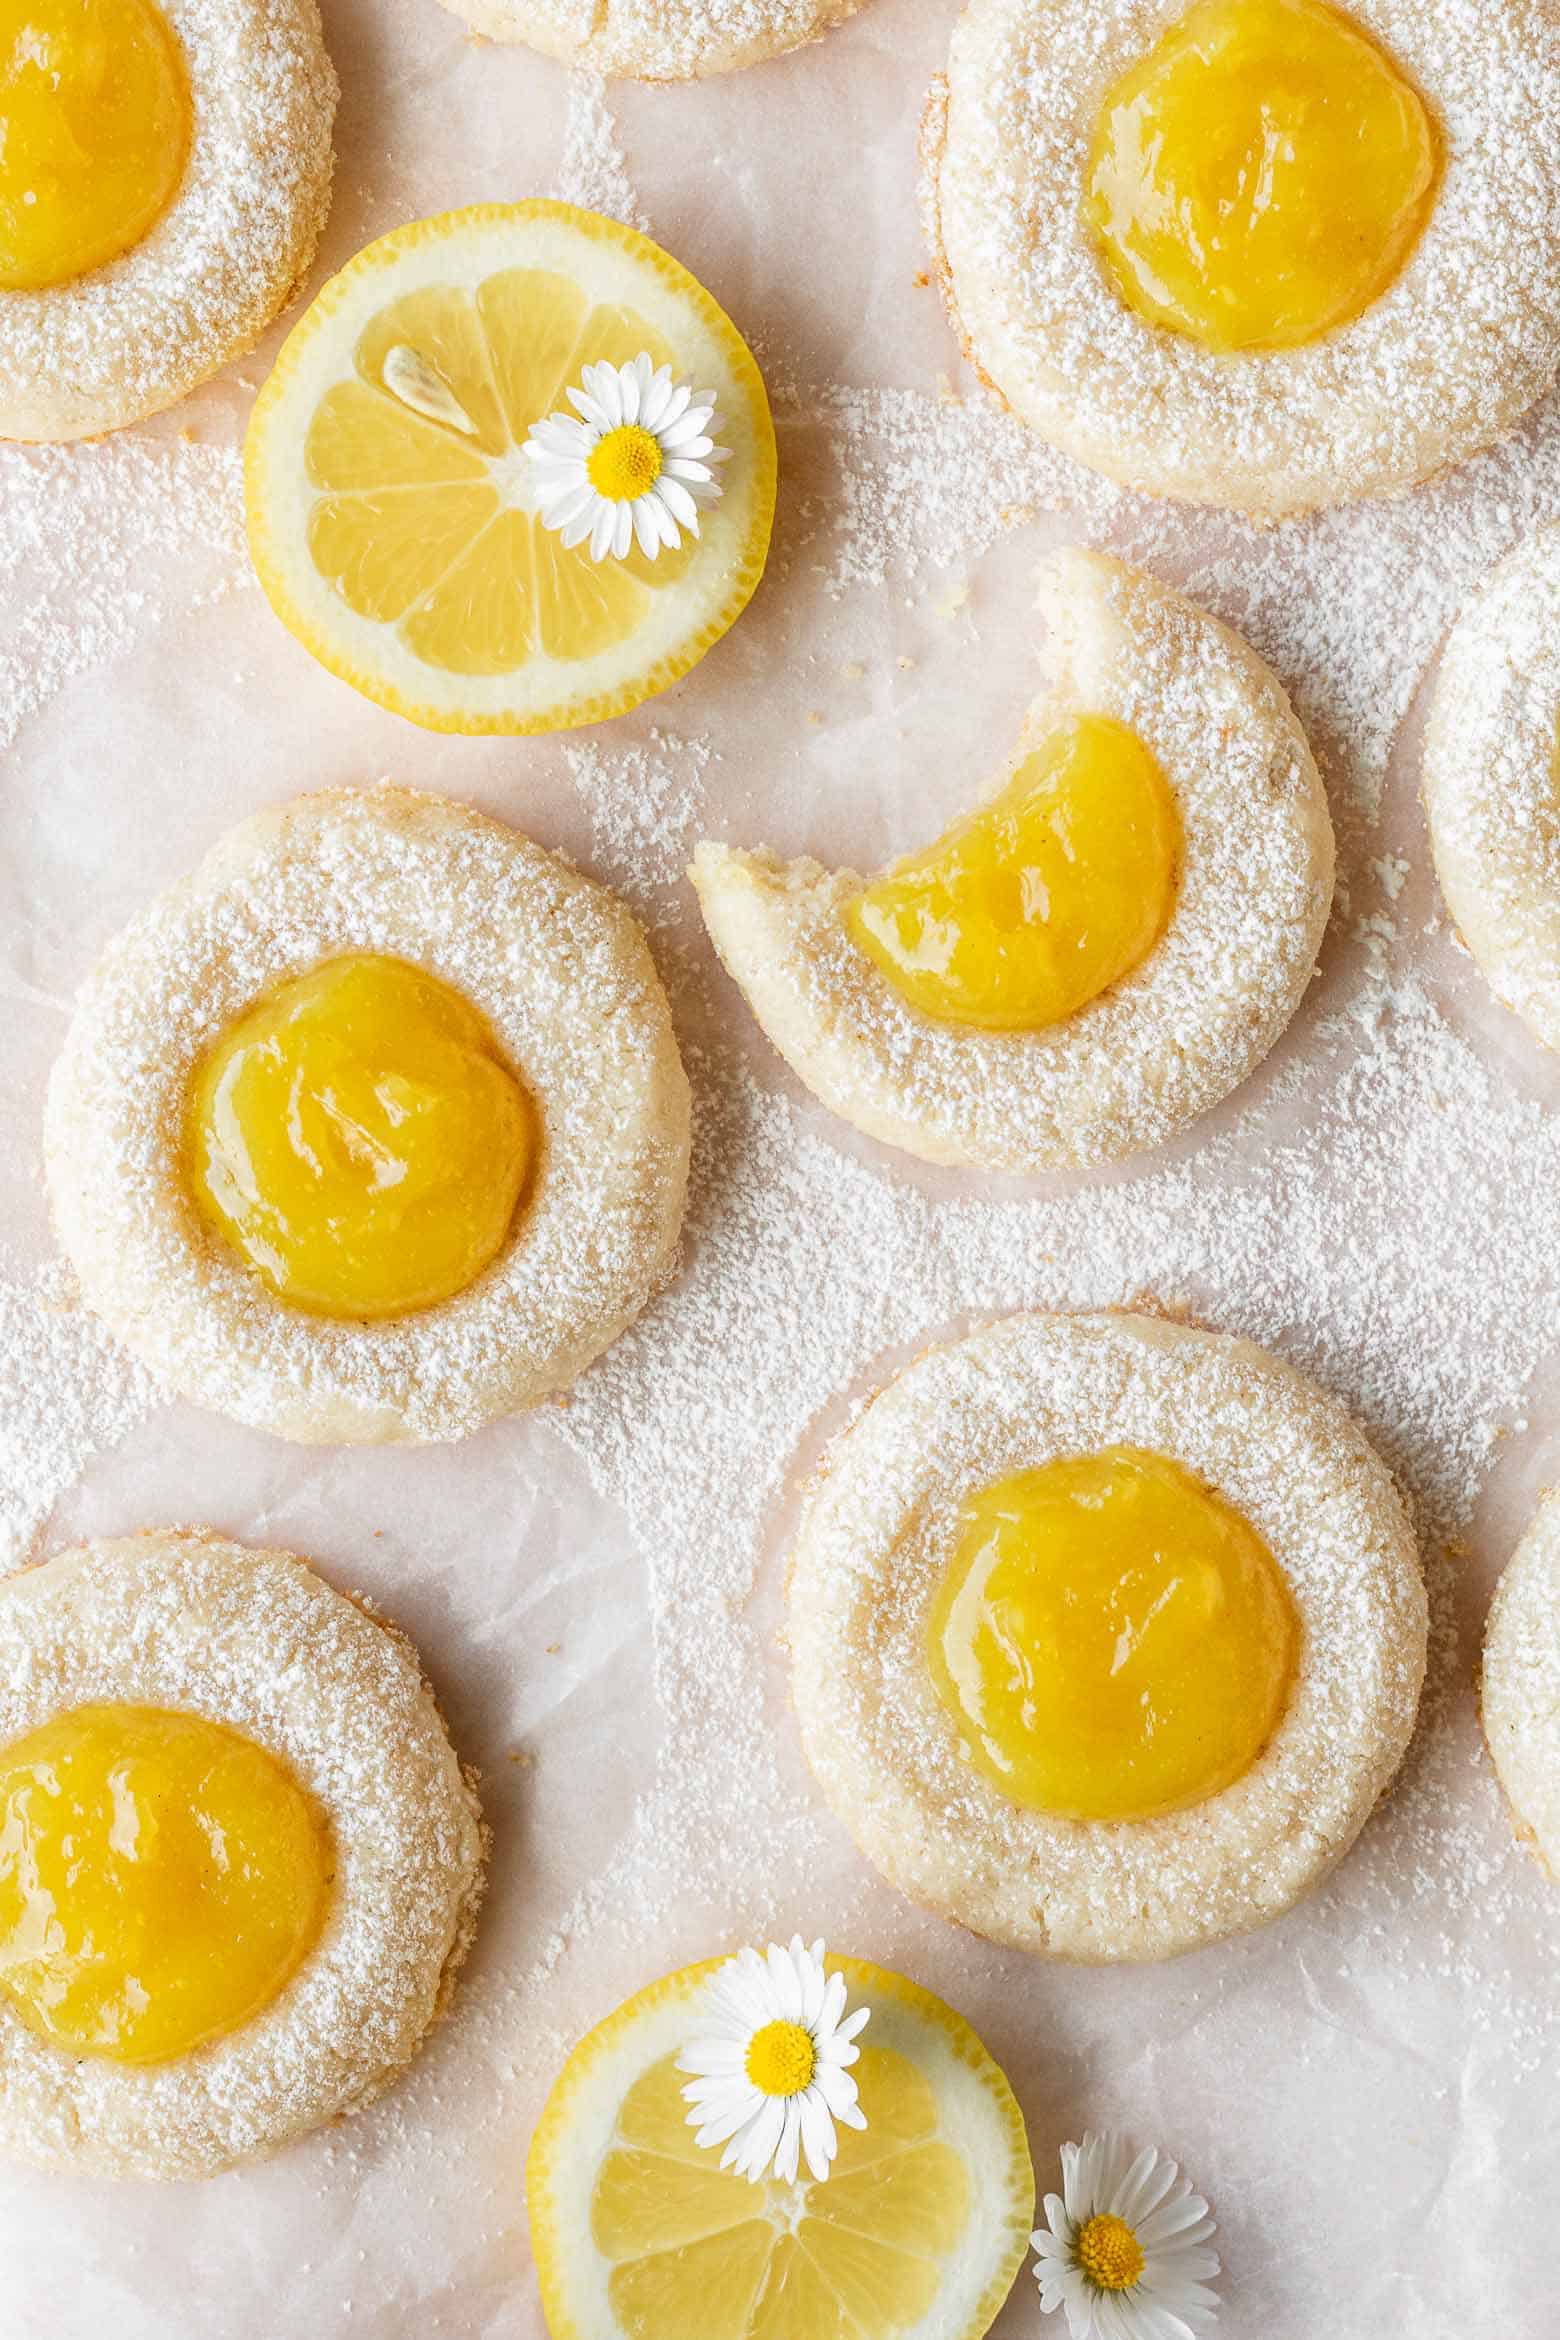 Lemon thumbprint cookies with a bite taken out of one coookie.